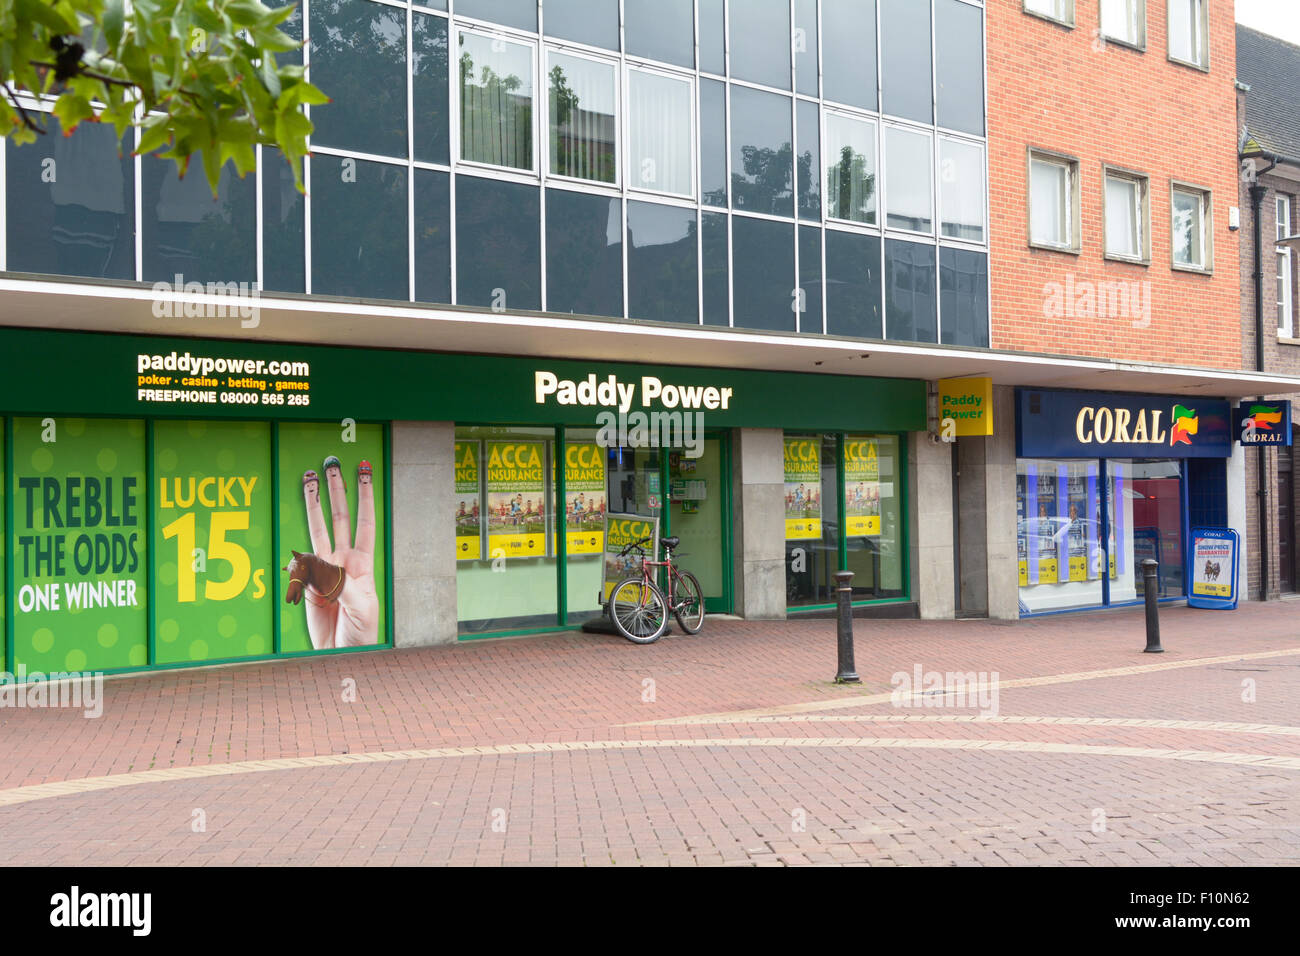 Paddy Power and Coral bookmakers next door to each other in the town centre in Bedford, Bedfordshire, England Stock Photo